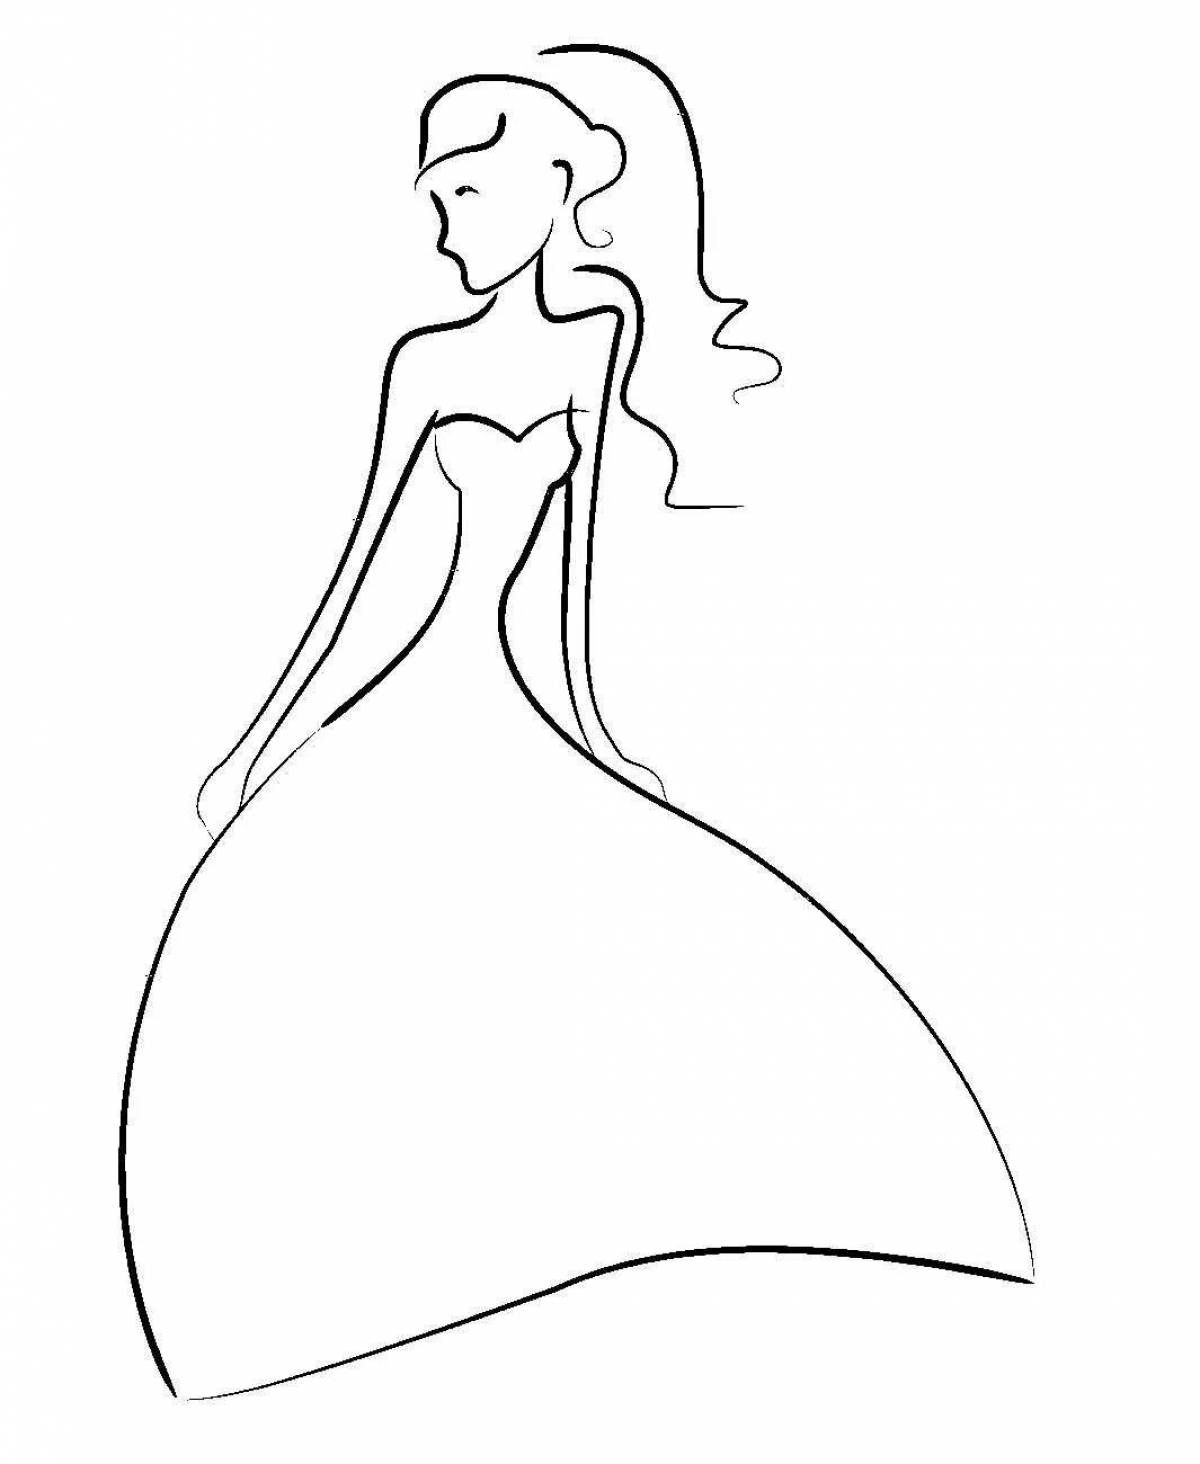 Gorgeous coloring of the silhouette of a girl in a dress